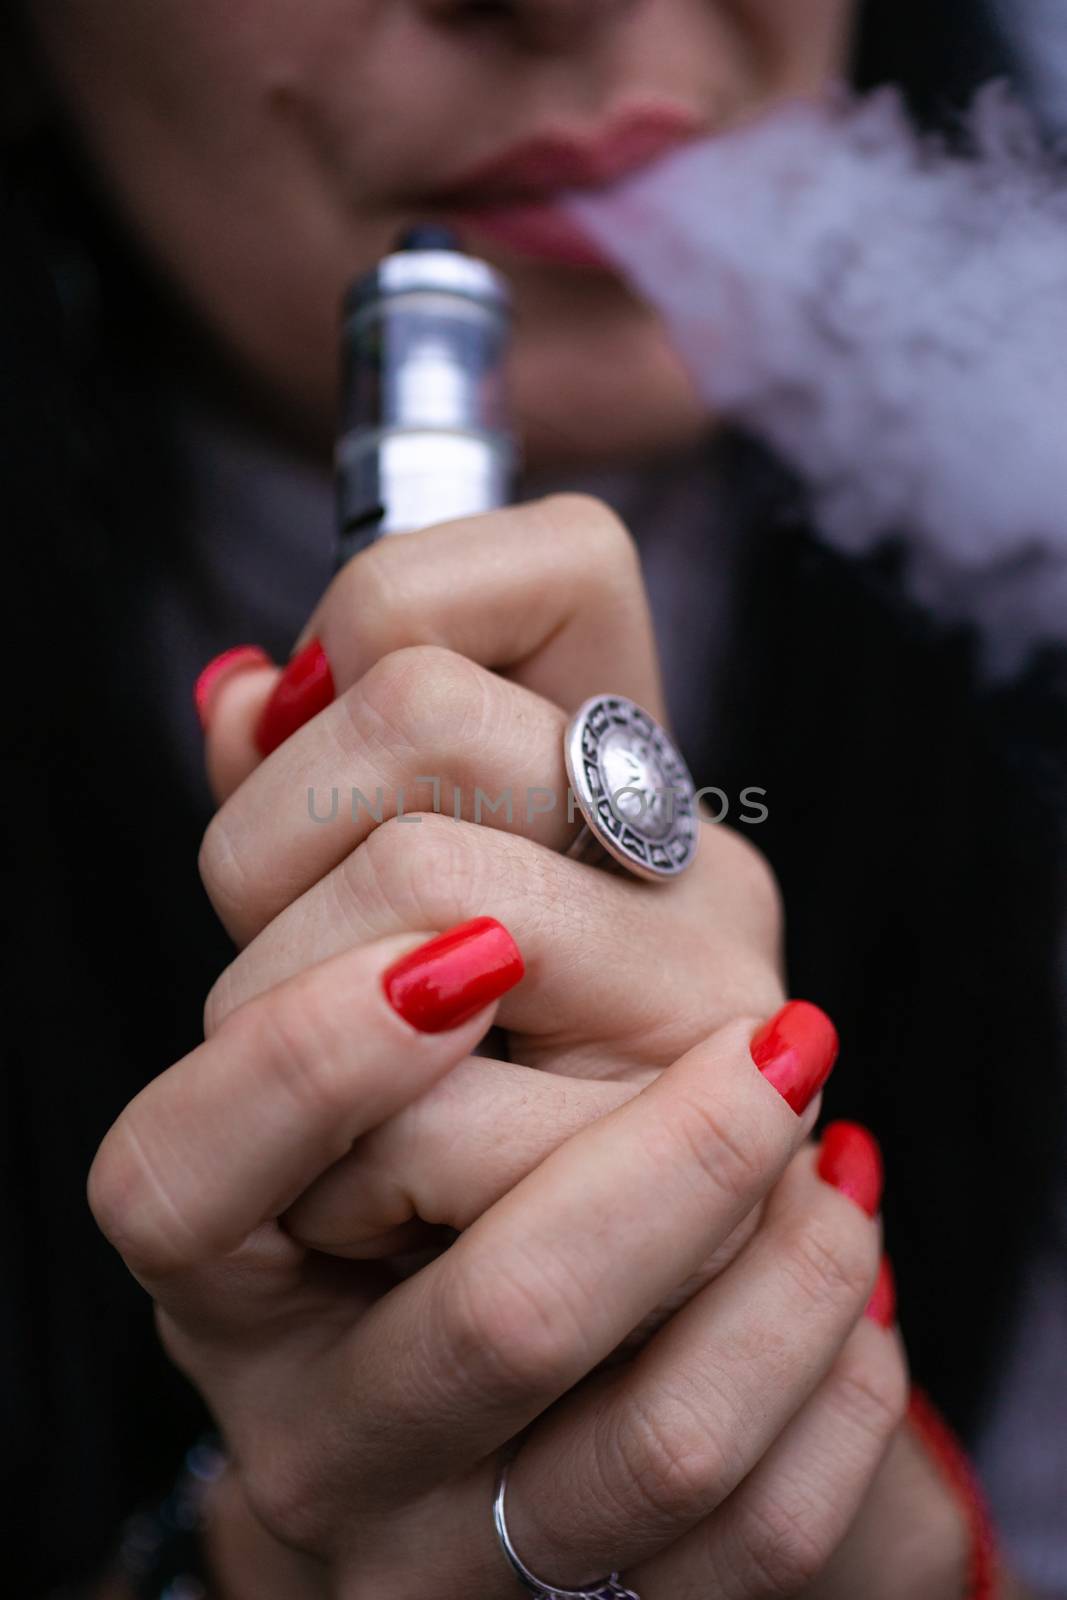 Caucasian woman with red nails manicure and antique ring on finger holds small vape. Smoking alternative vay. Woman exhales thick smoke. Life without cigarettes. Woman-vaper. Small e-cigarette.